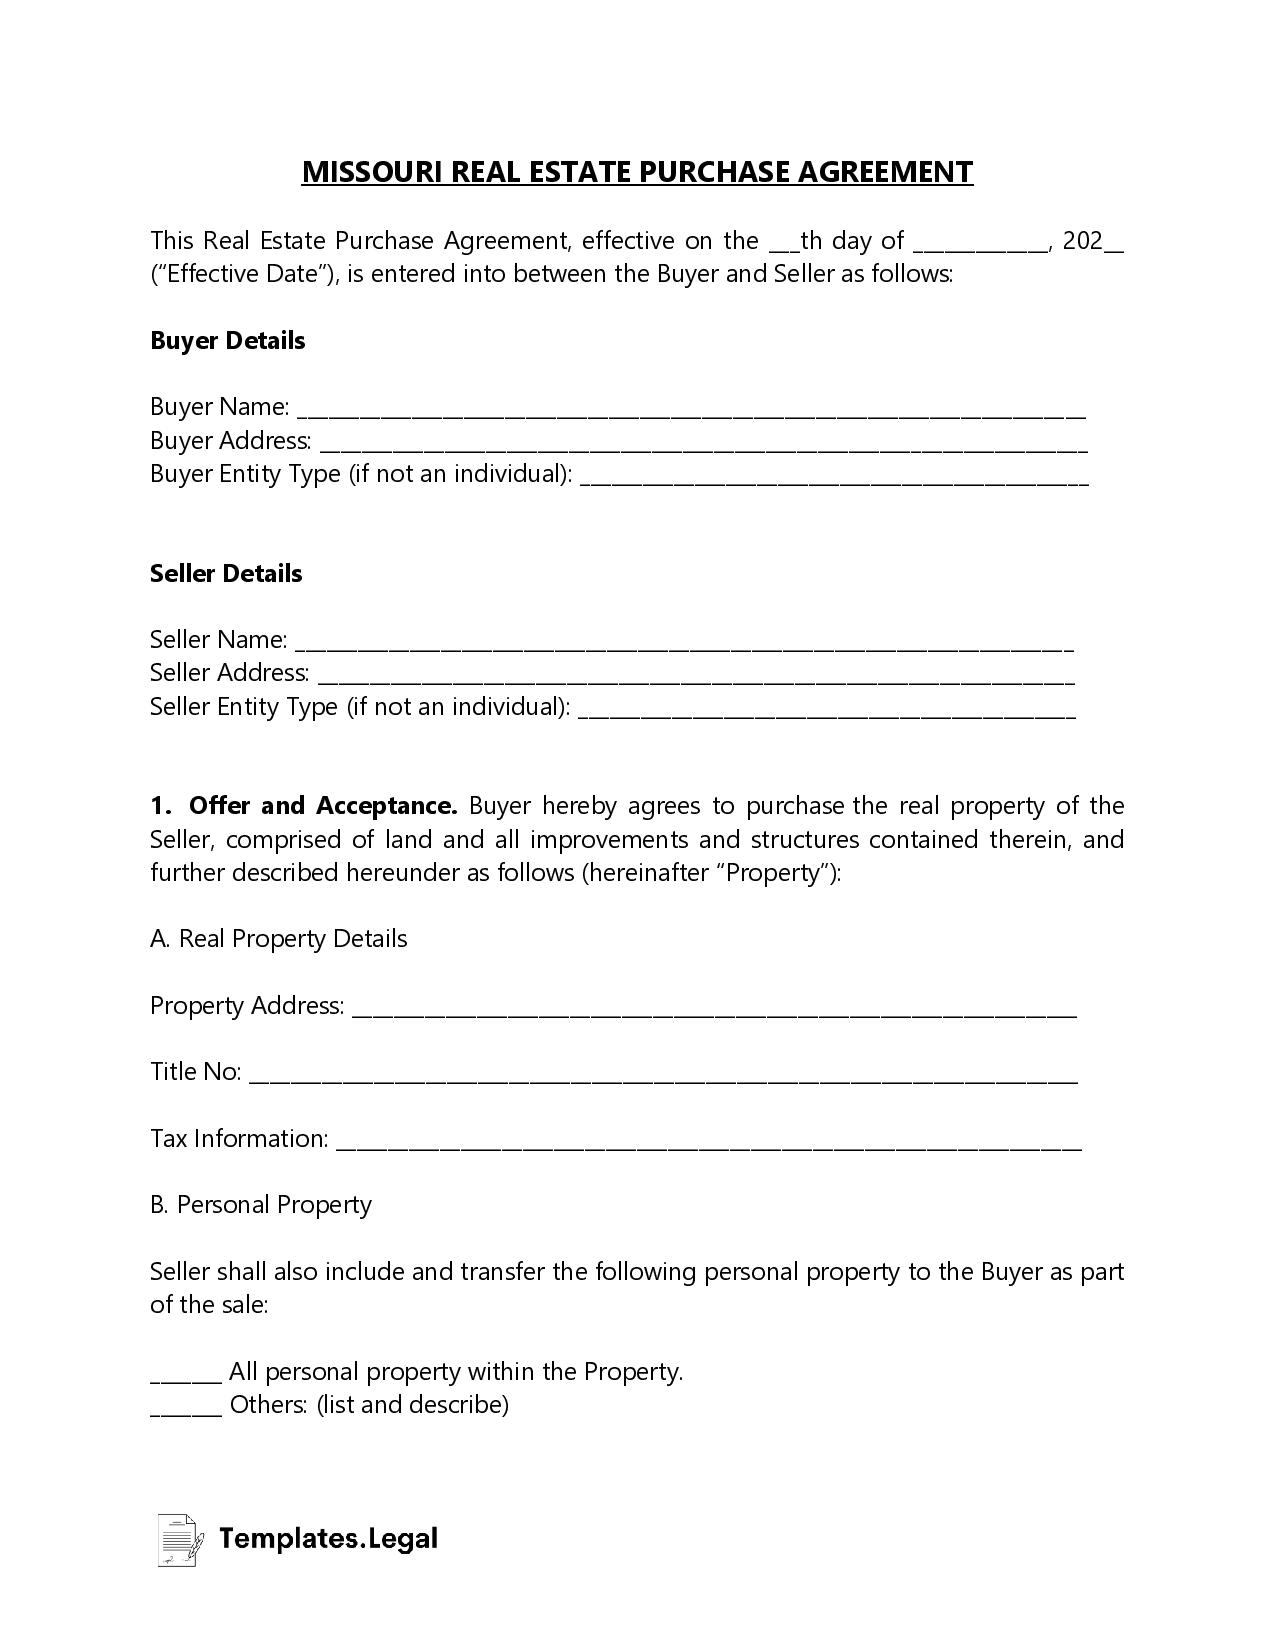 MIssouri Real Estate Purchase Agreement - Templates.Legal